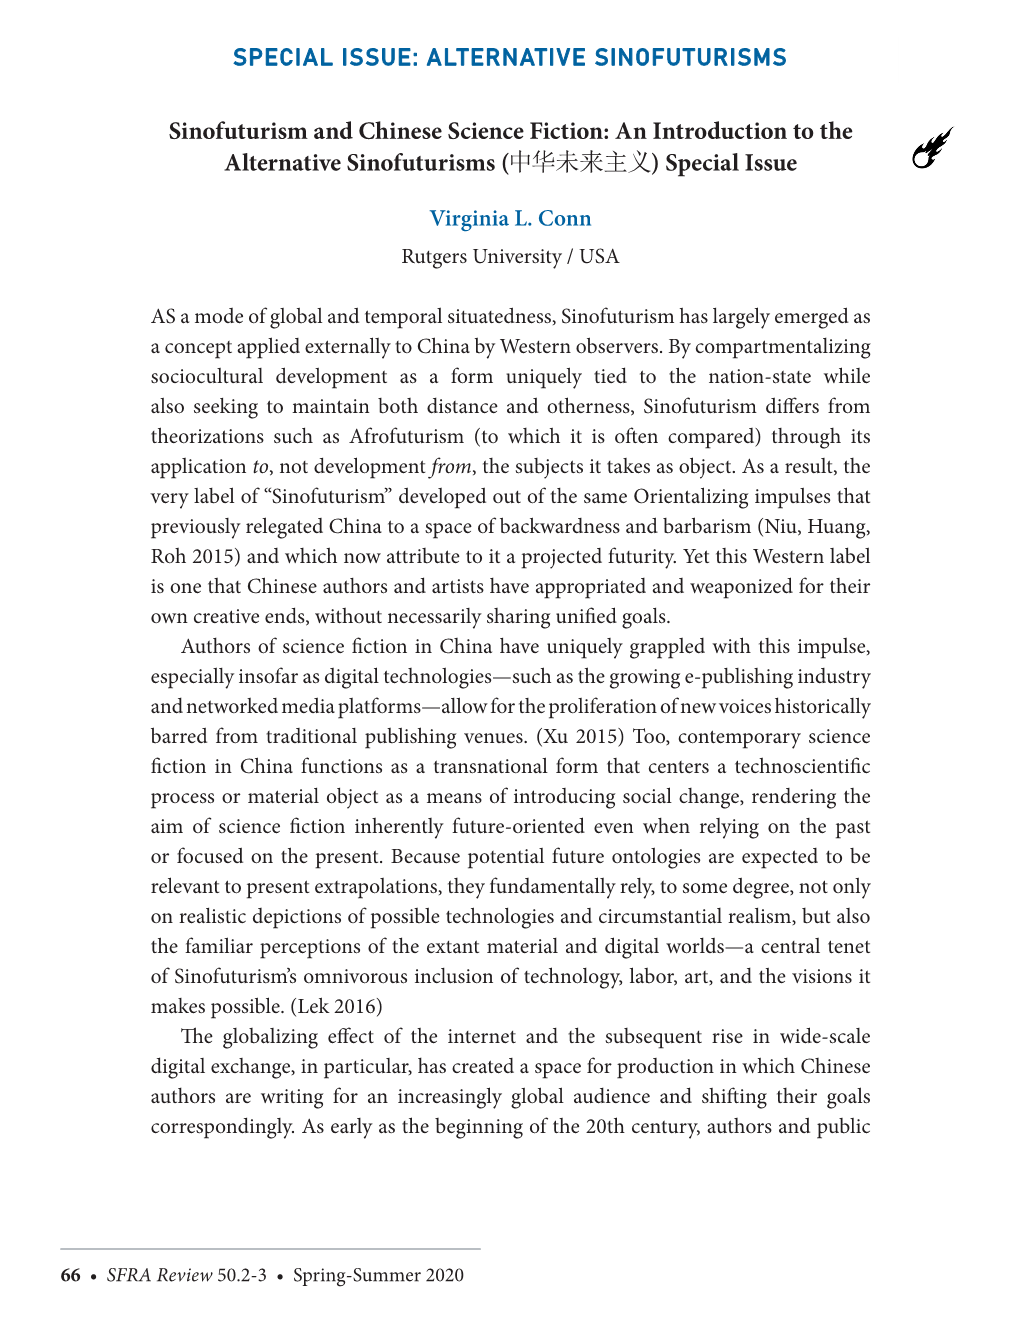 Sinofuturism and Chinese Science Fiction: an Introduction to the Alternative Sinofuturisms (中华未来主义) Special Issue